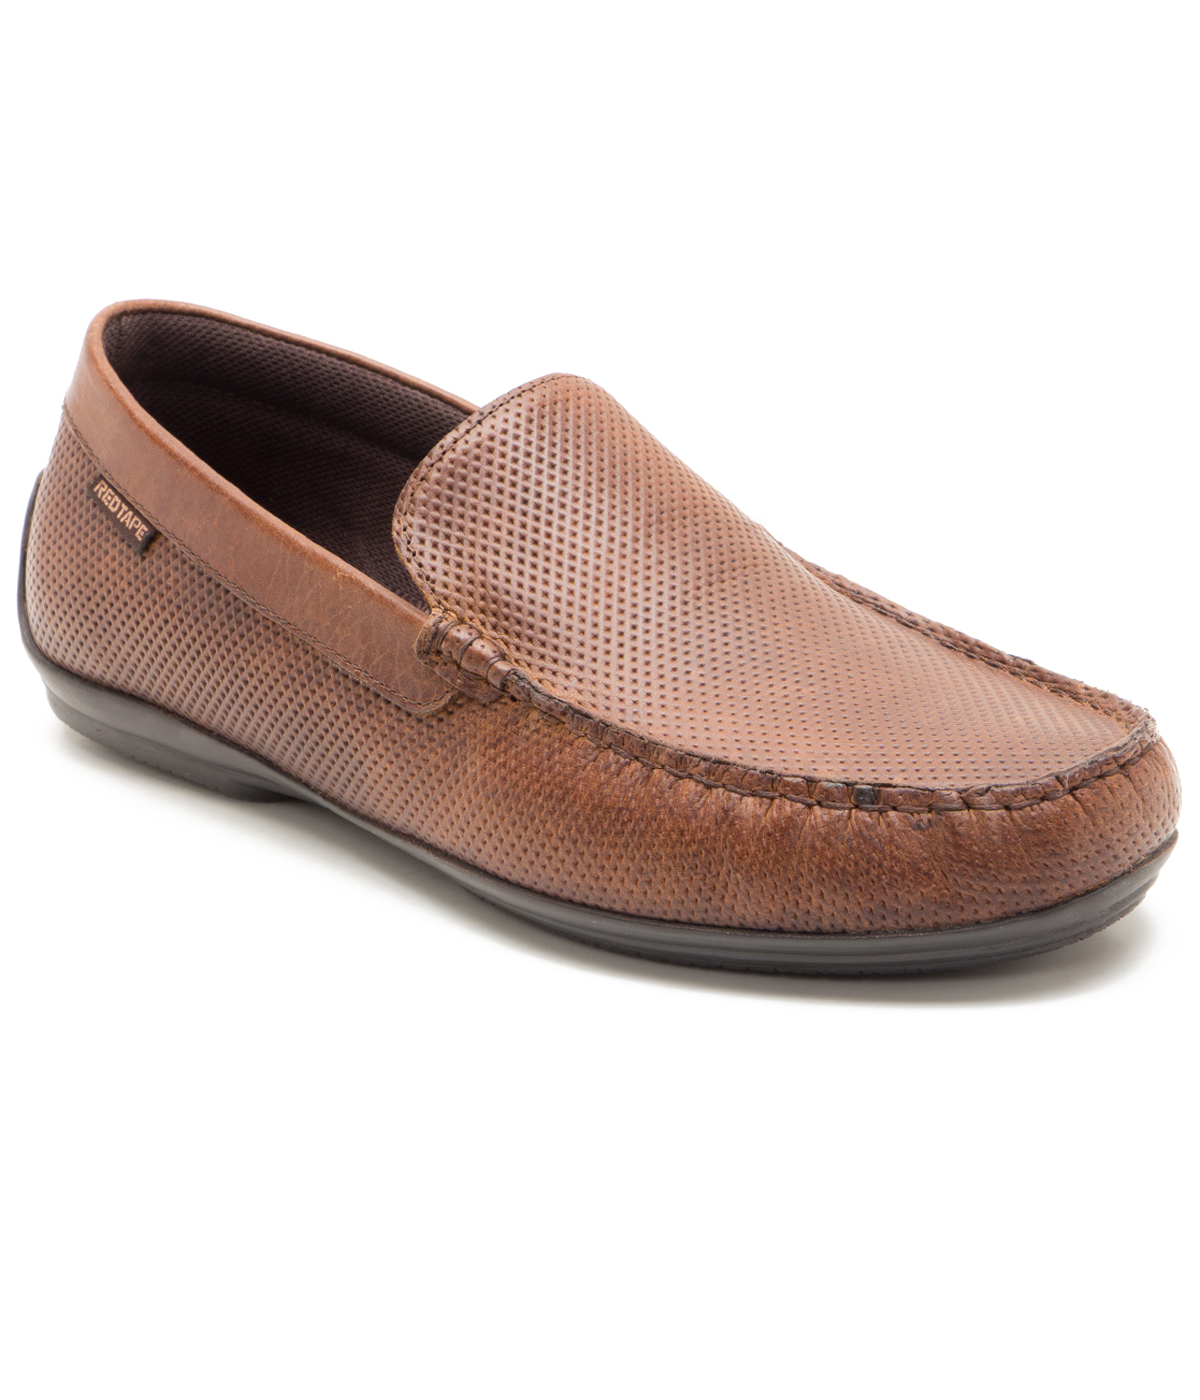 Buy Red Tape Men's Tan Slip on Smart Loafers Online @ ₹3595 from ShopClues